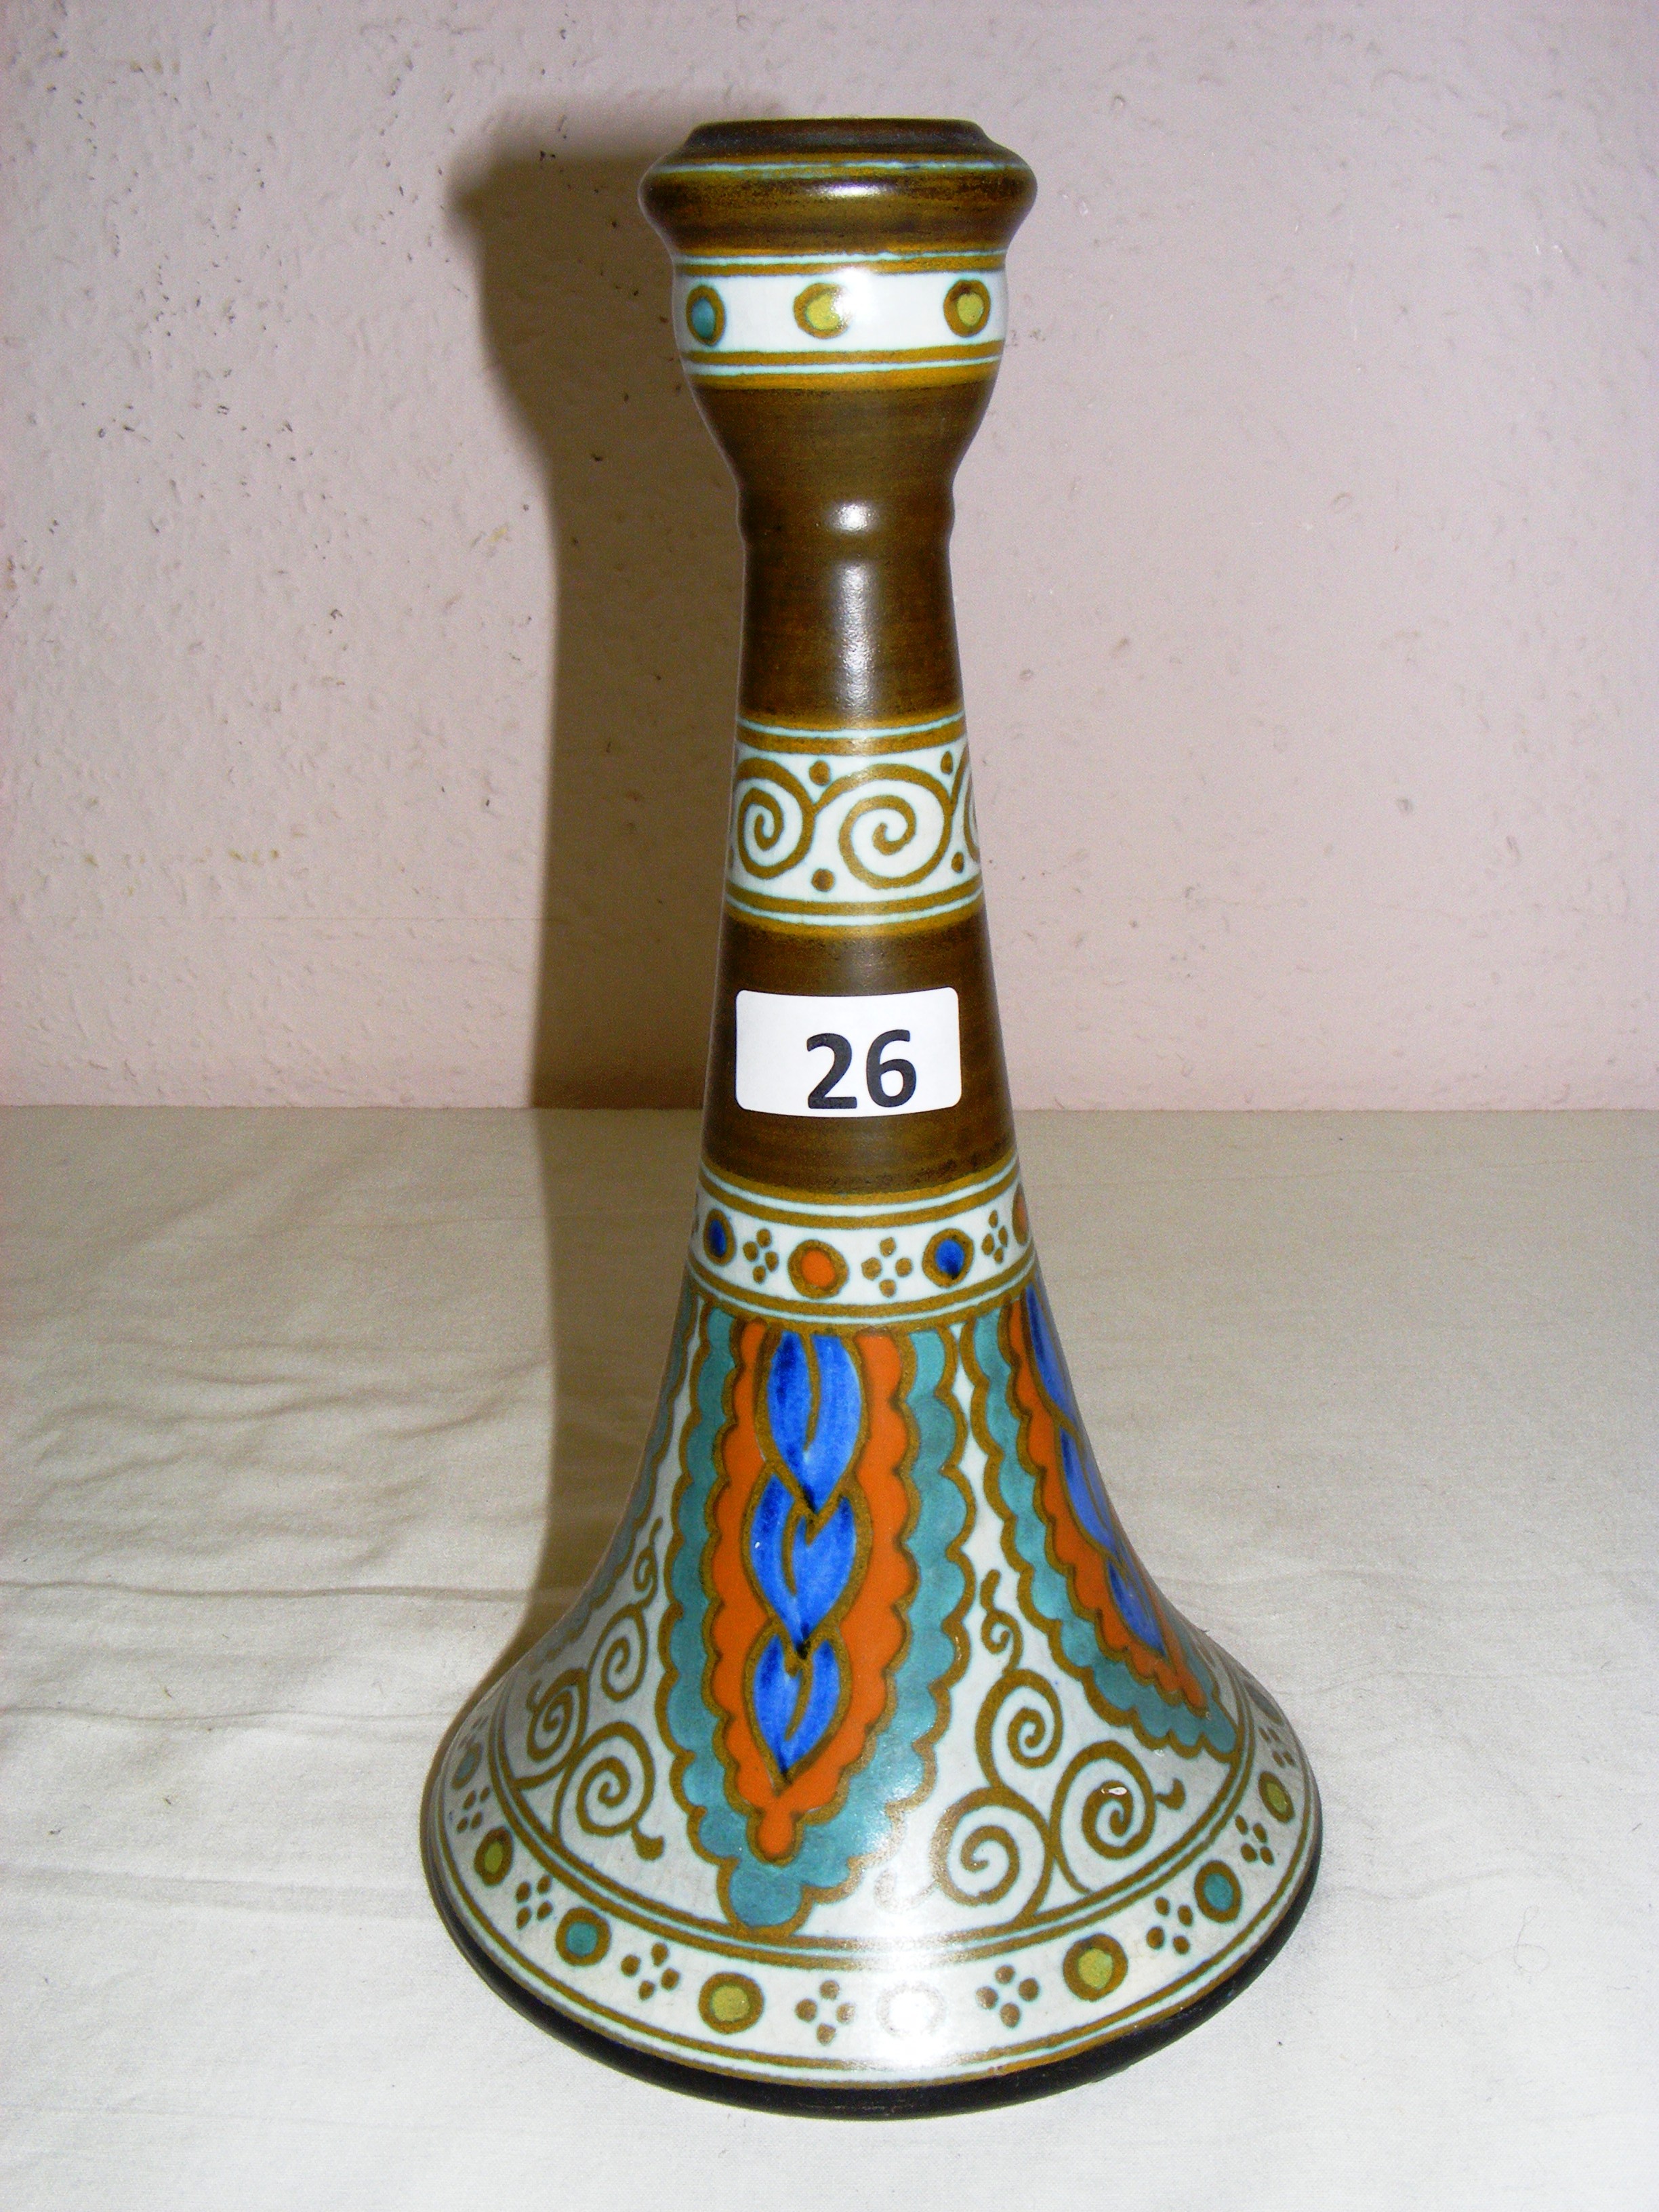 A Gouda Holland hat shaped vase measuring 11" tall, with various base markings.